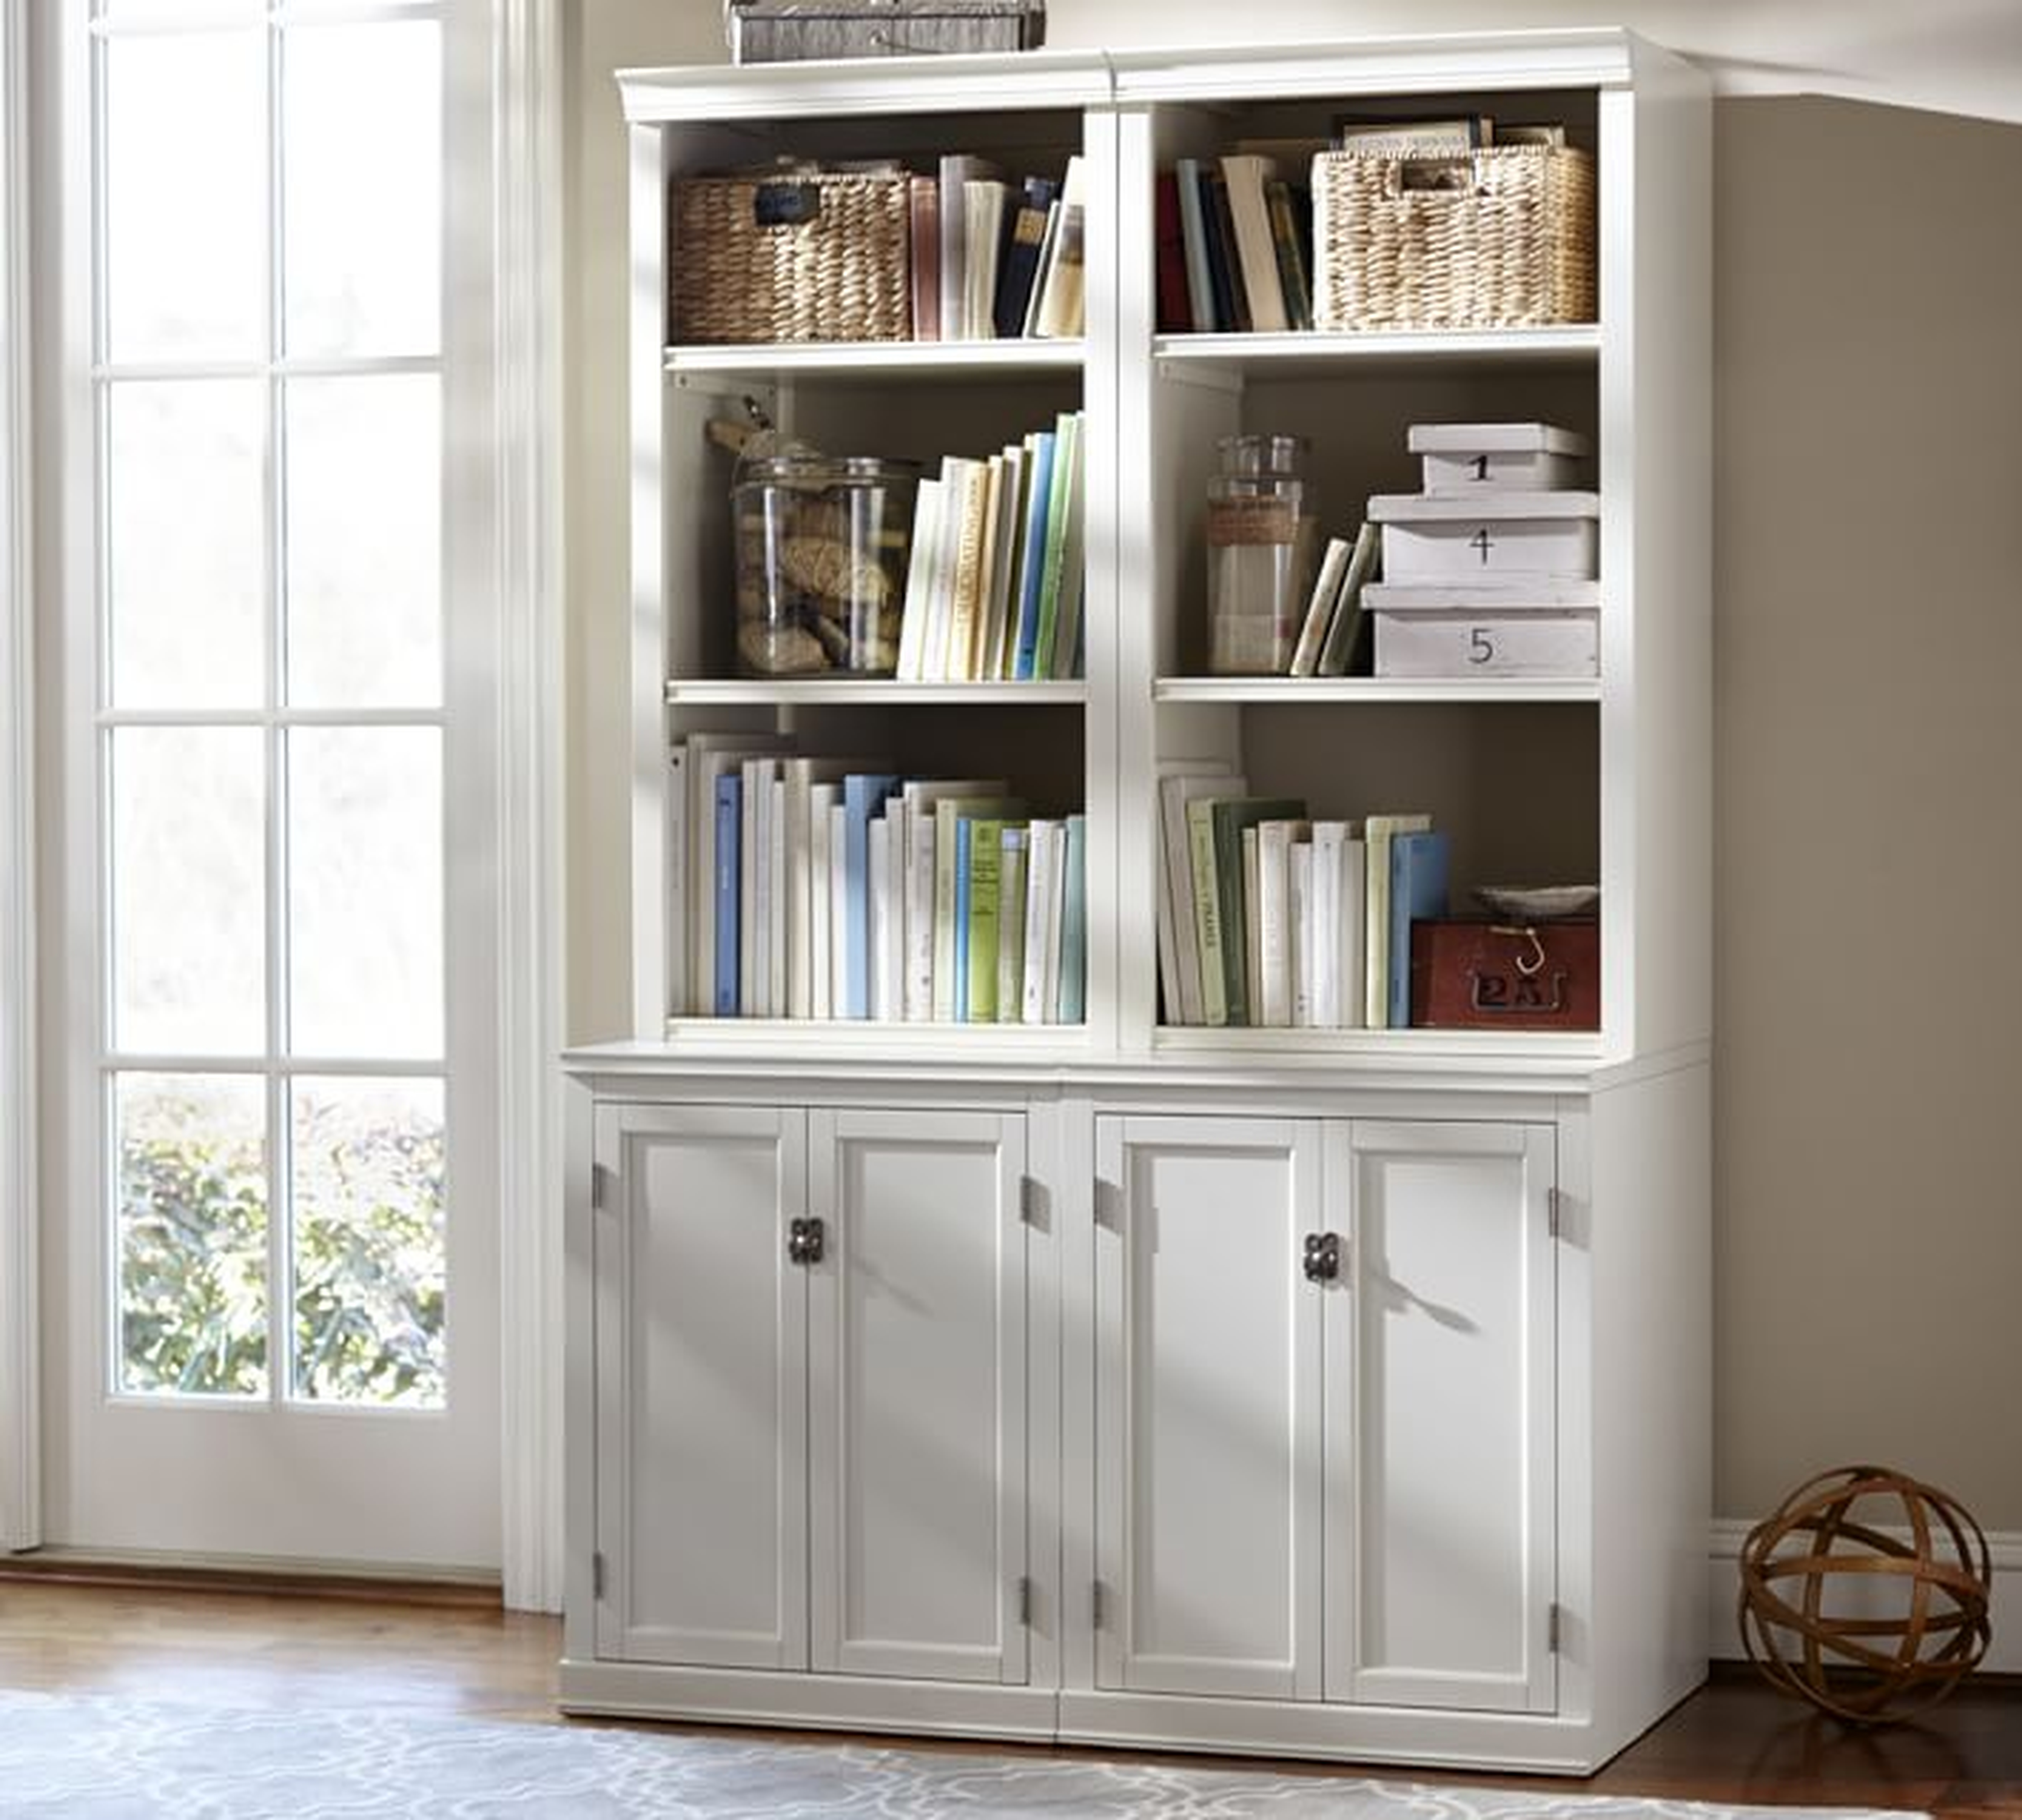 Logan Bookcase with Doors, Antique White - Pottery Barn